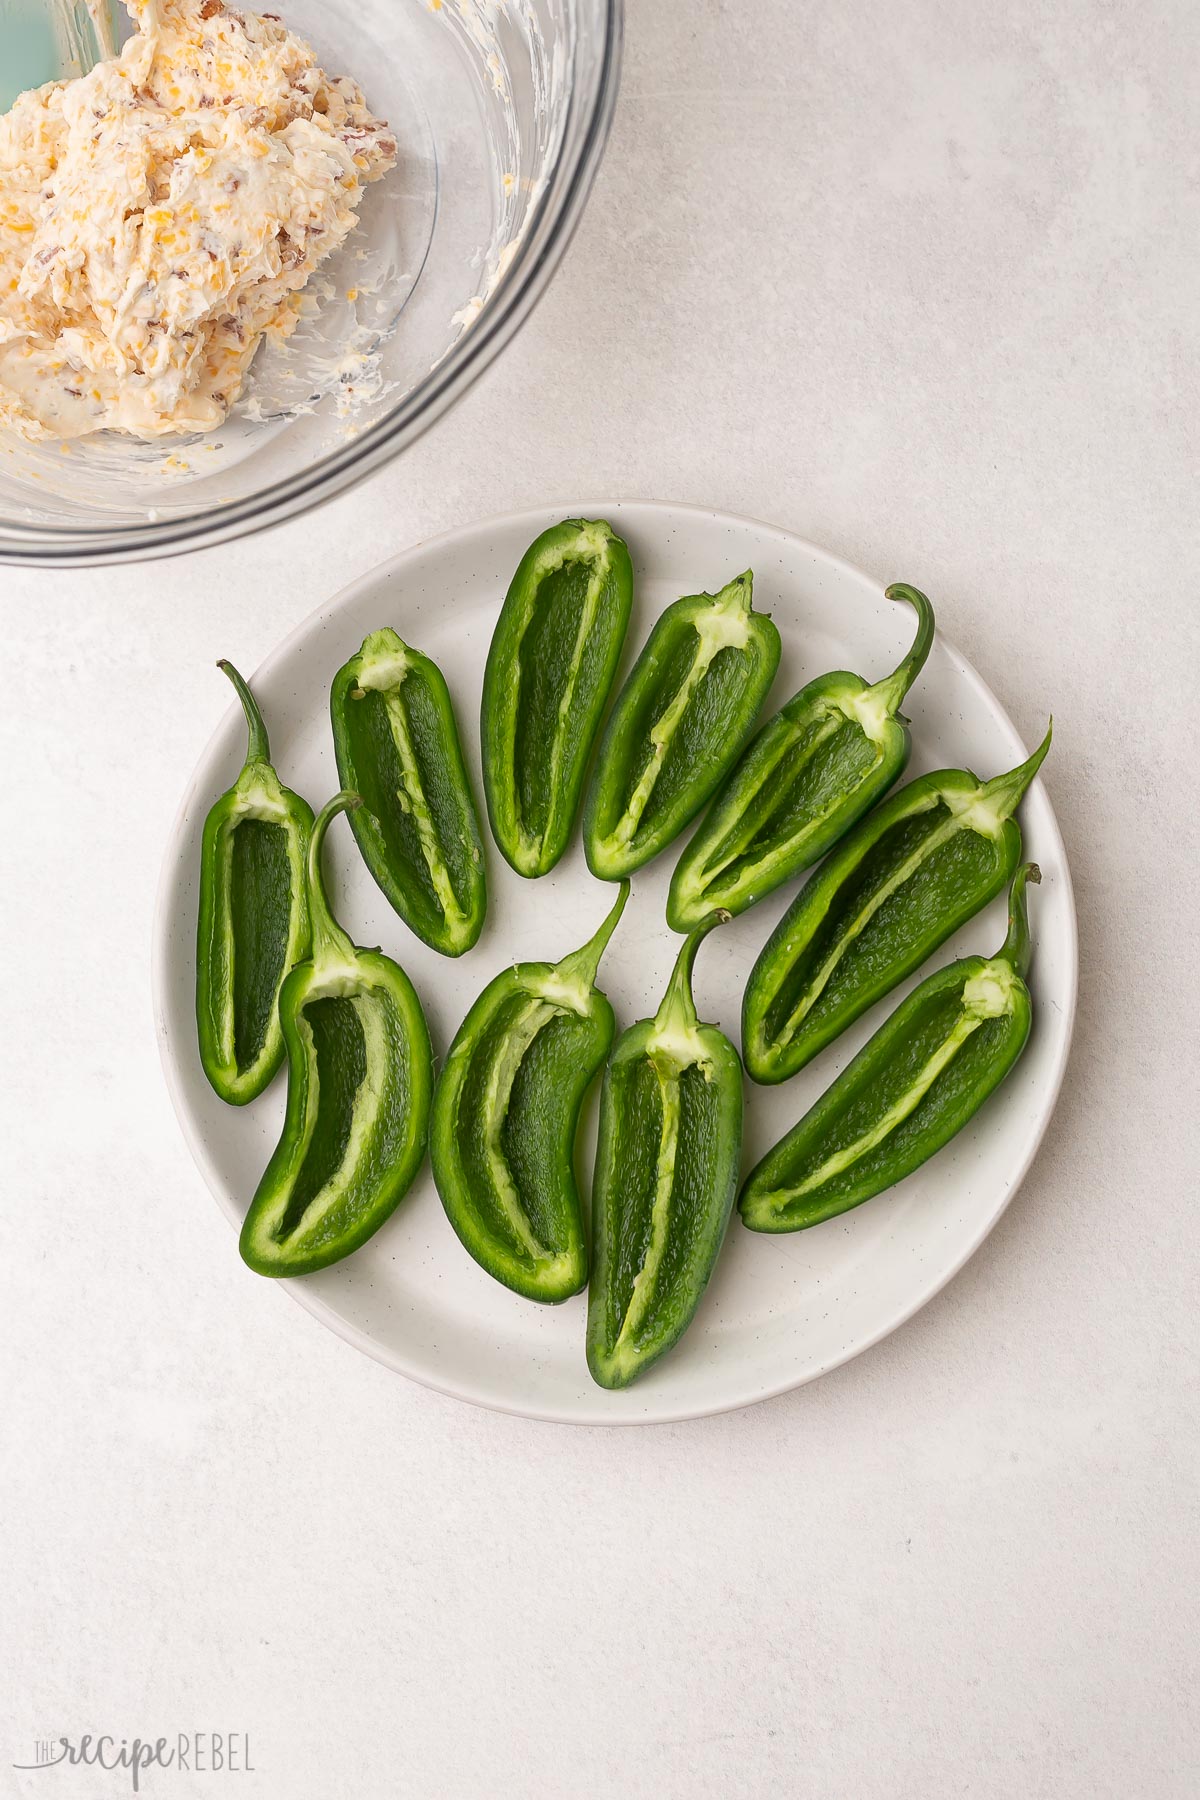 halved jalapenos on a white plate.